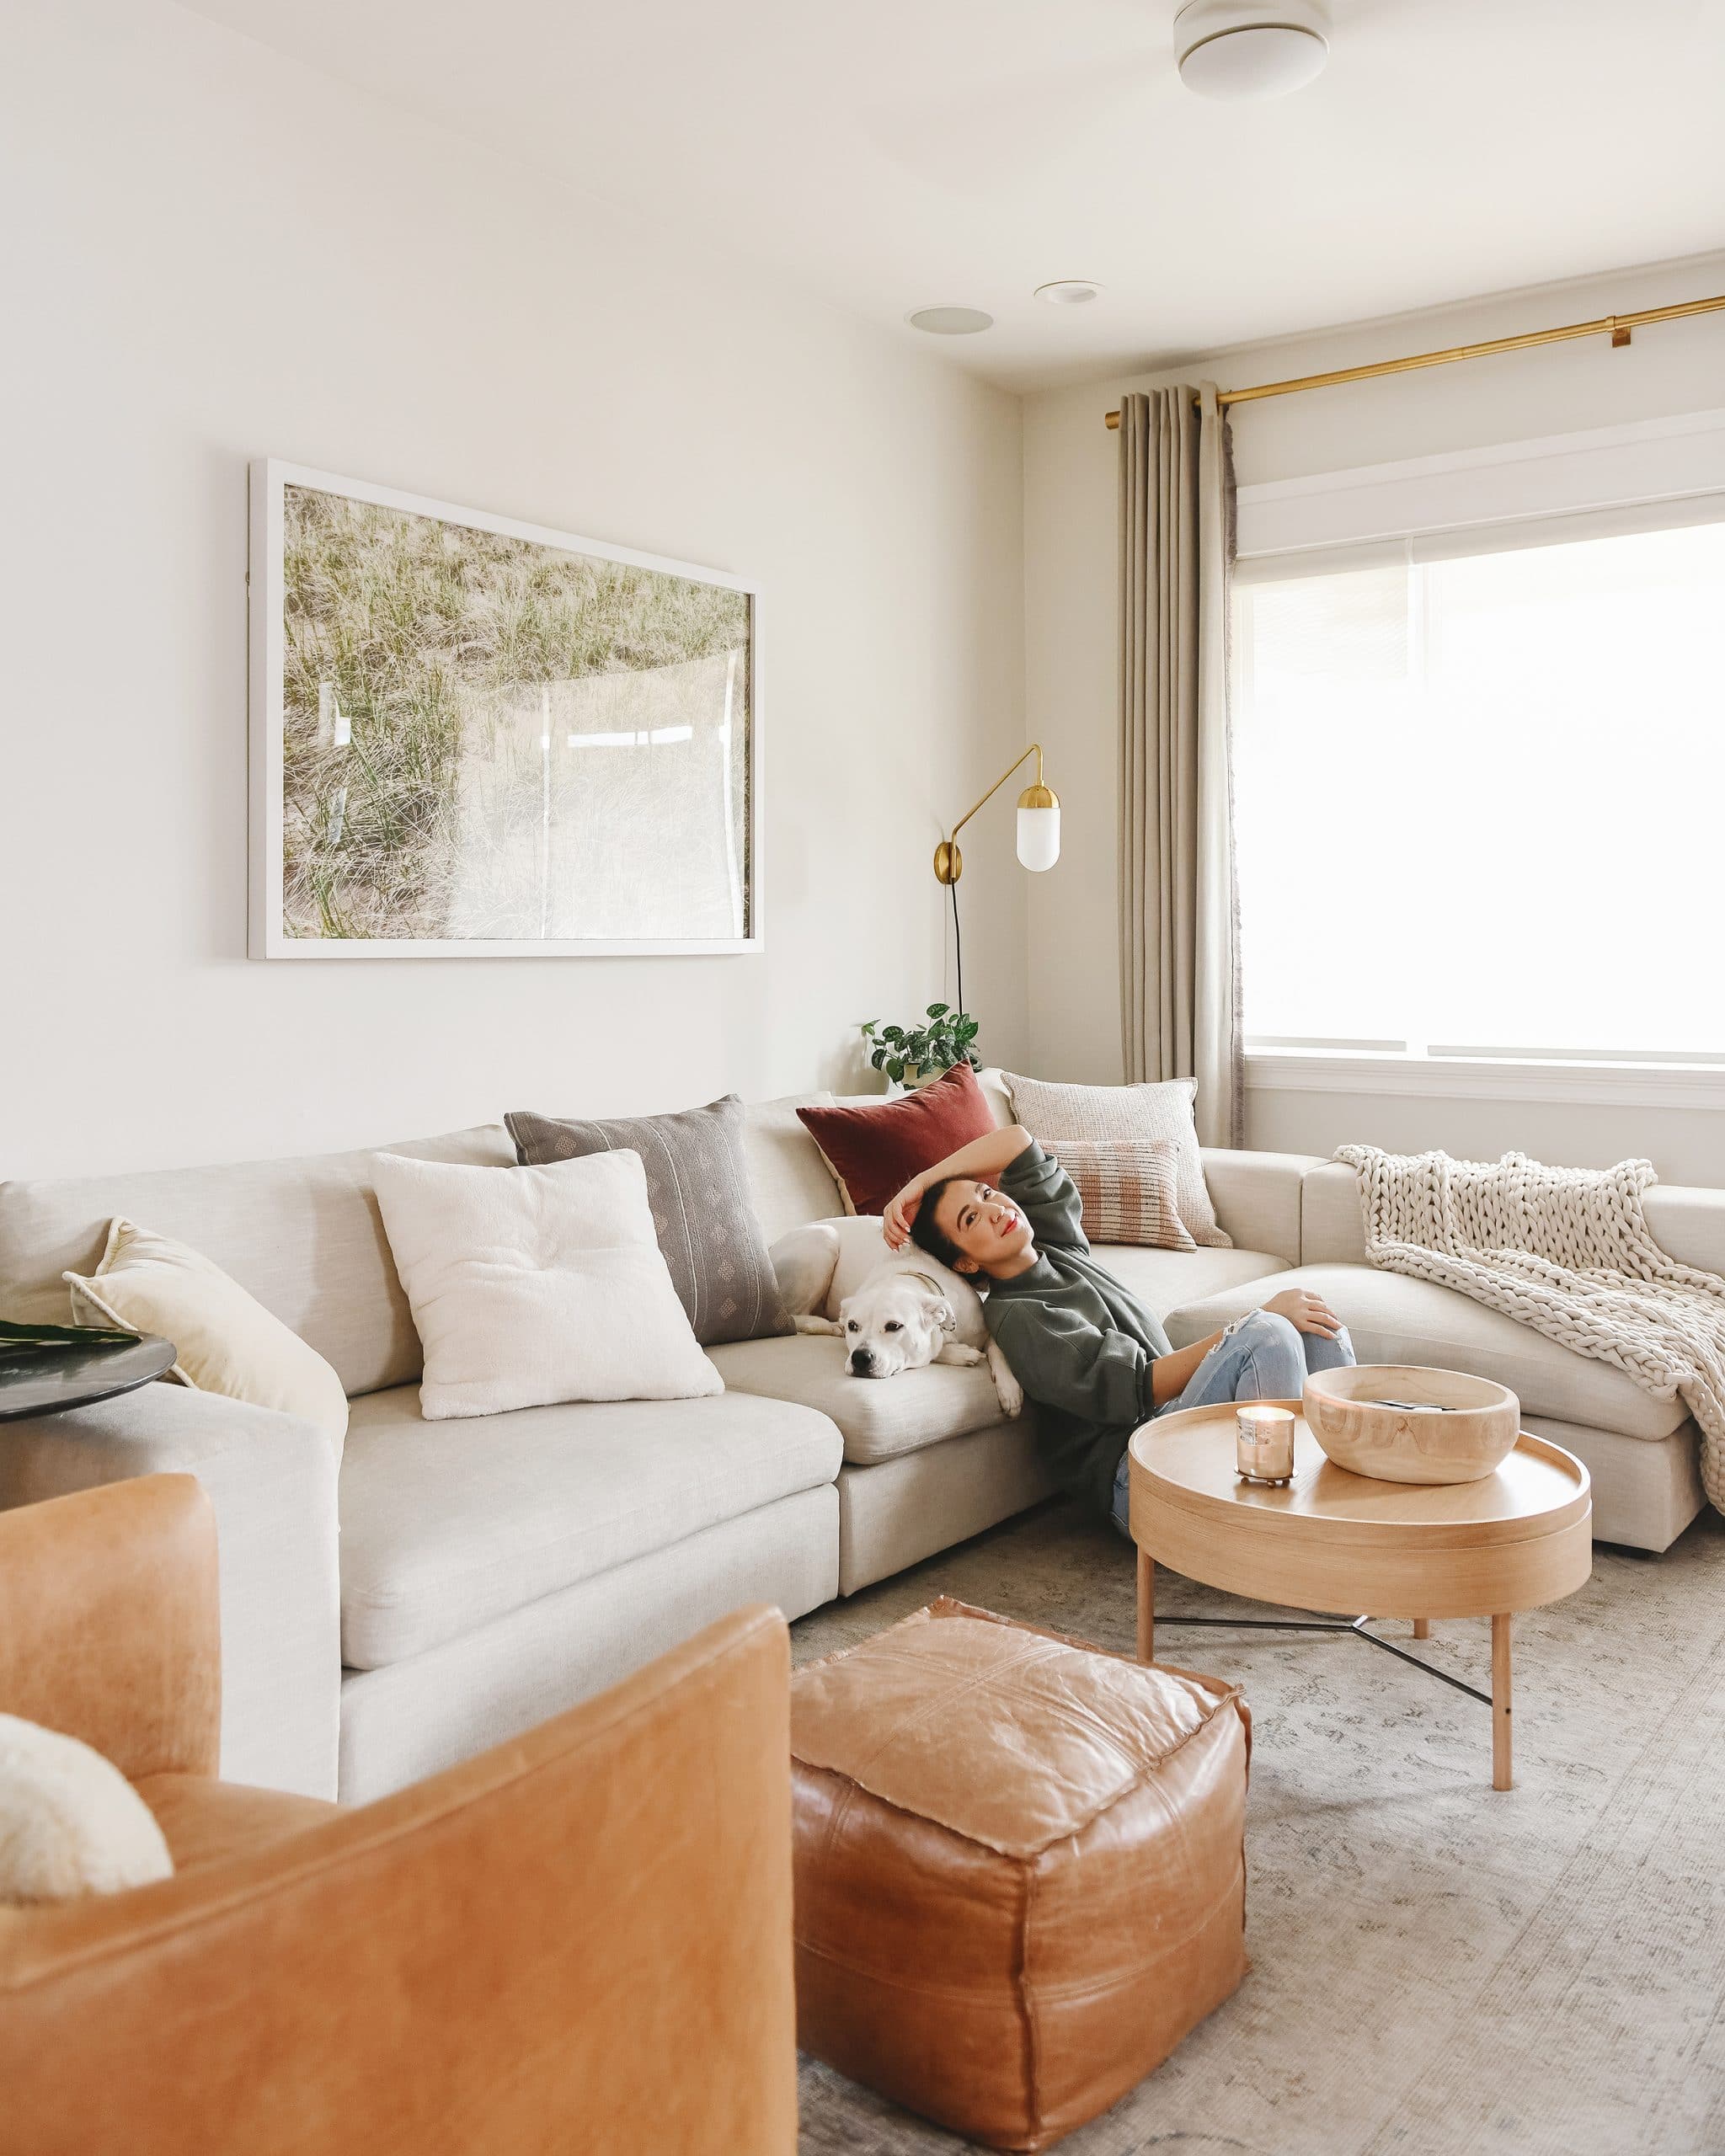 Neutral living room design with cream sectional sofa and white oak accents // via Yellow Brick Home